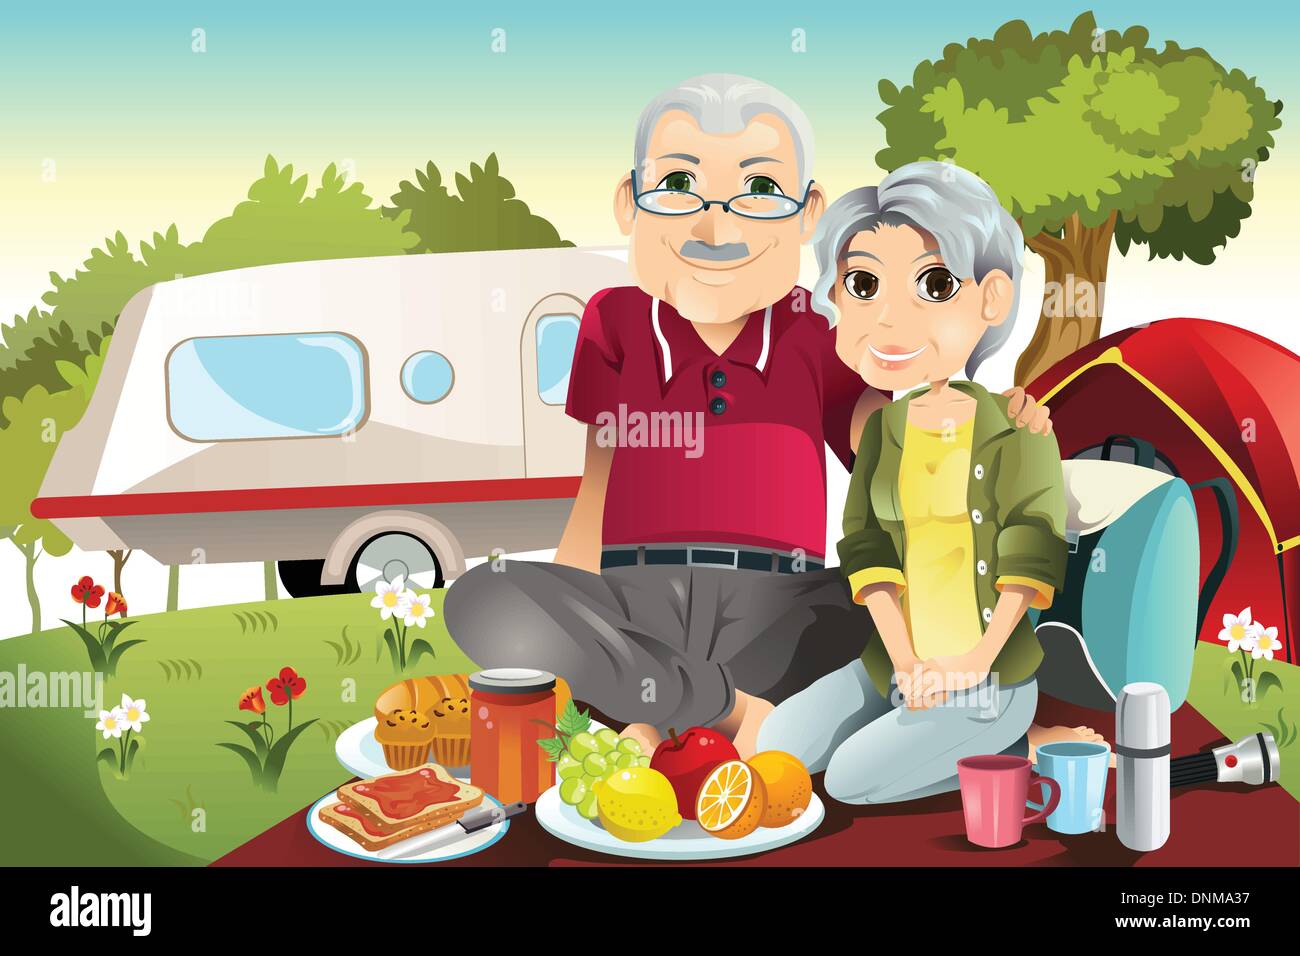 A vector illustration of senior couple camping and having a picnic Stock Vector